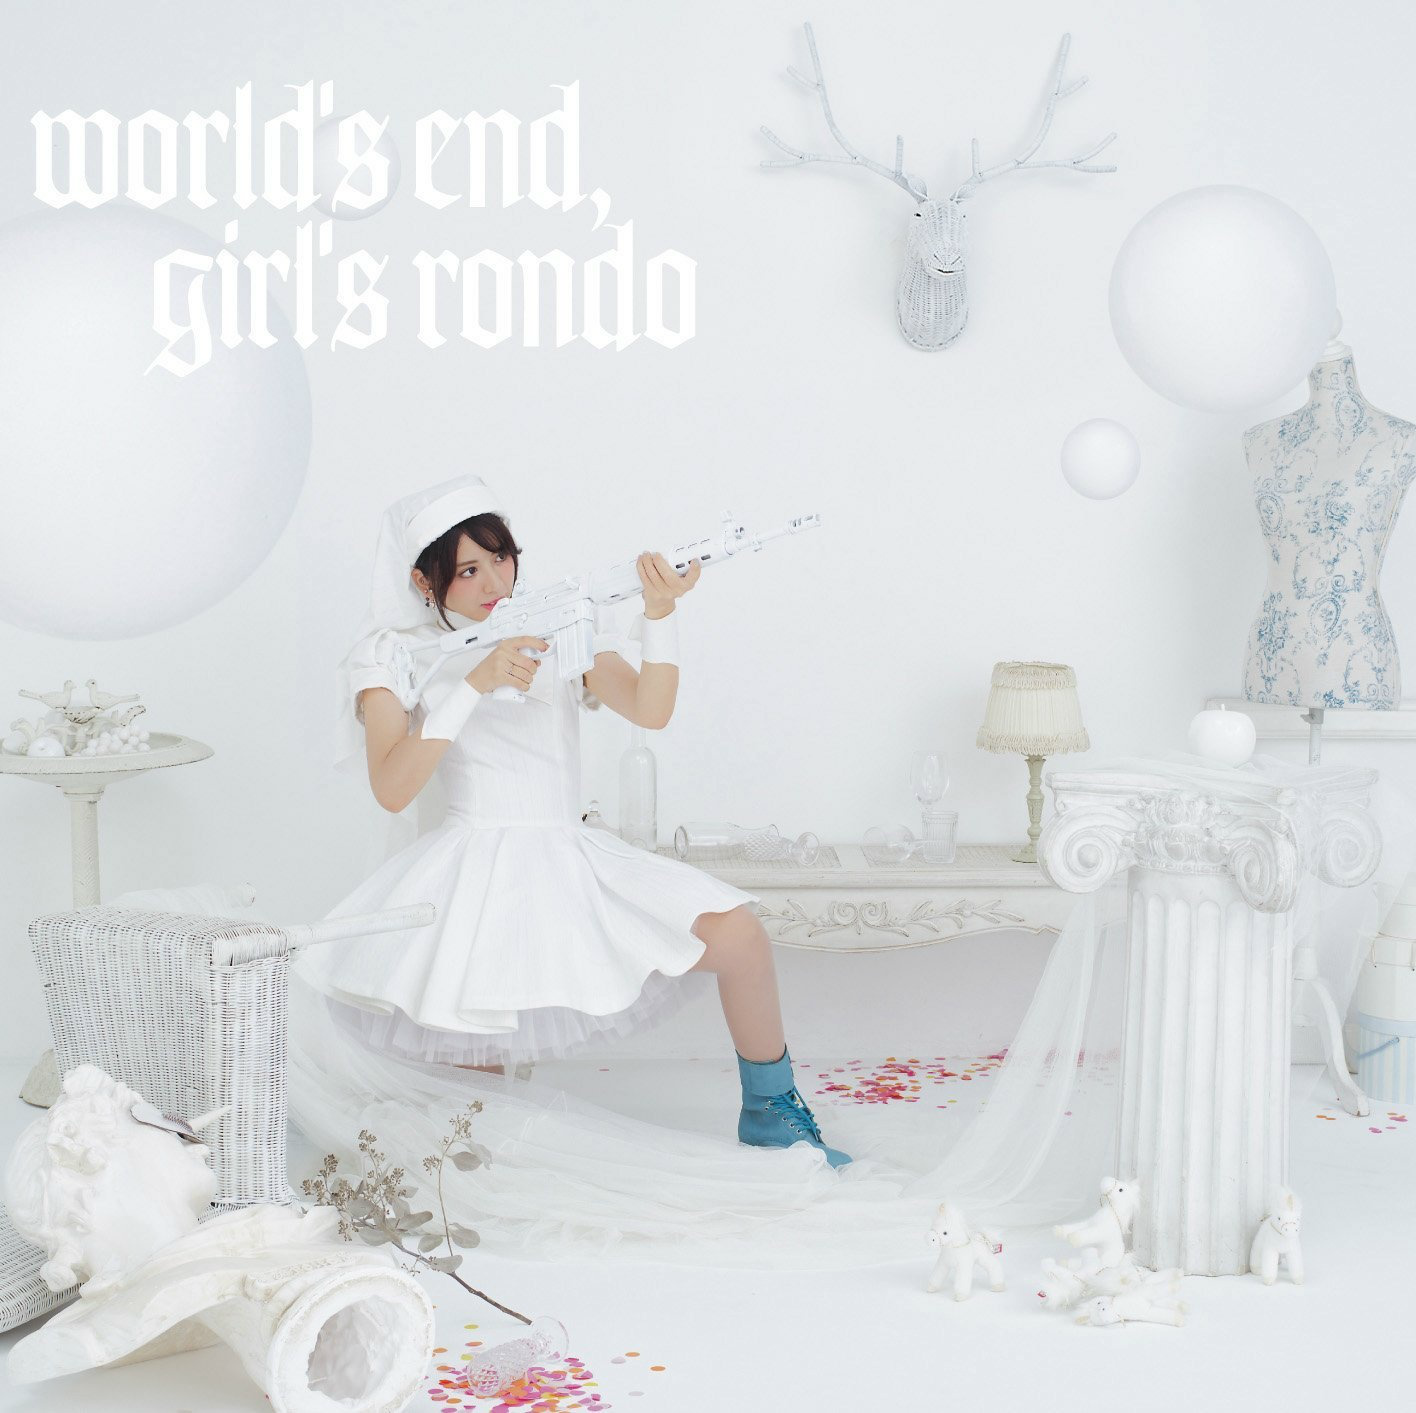 World's end girl's rondo.png